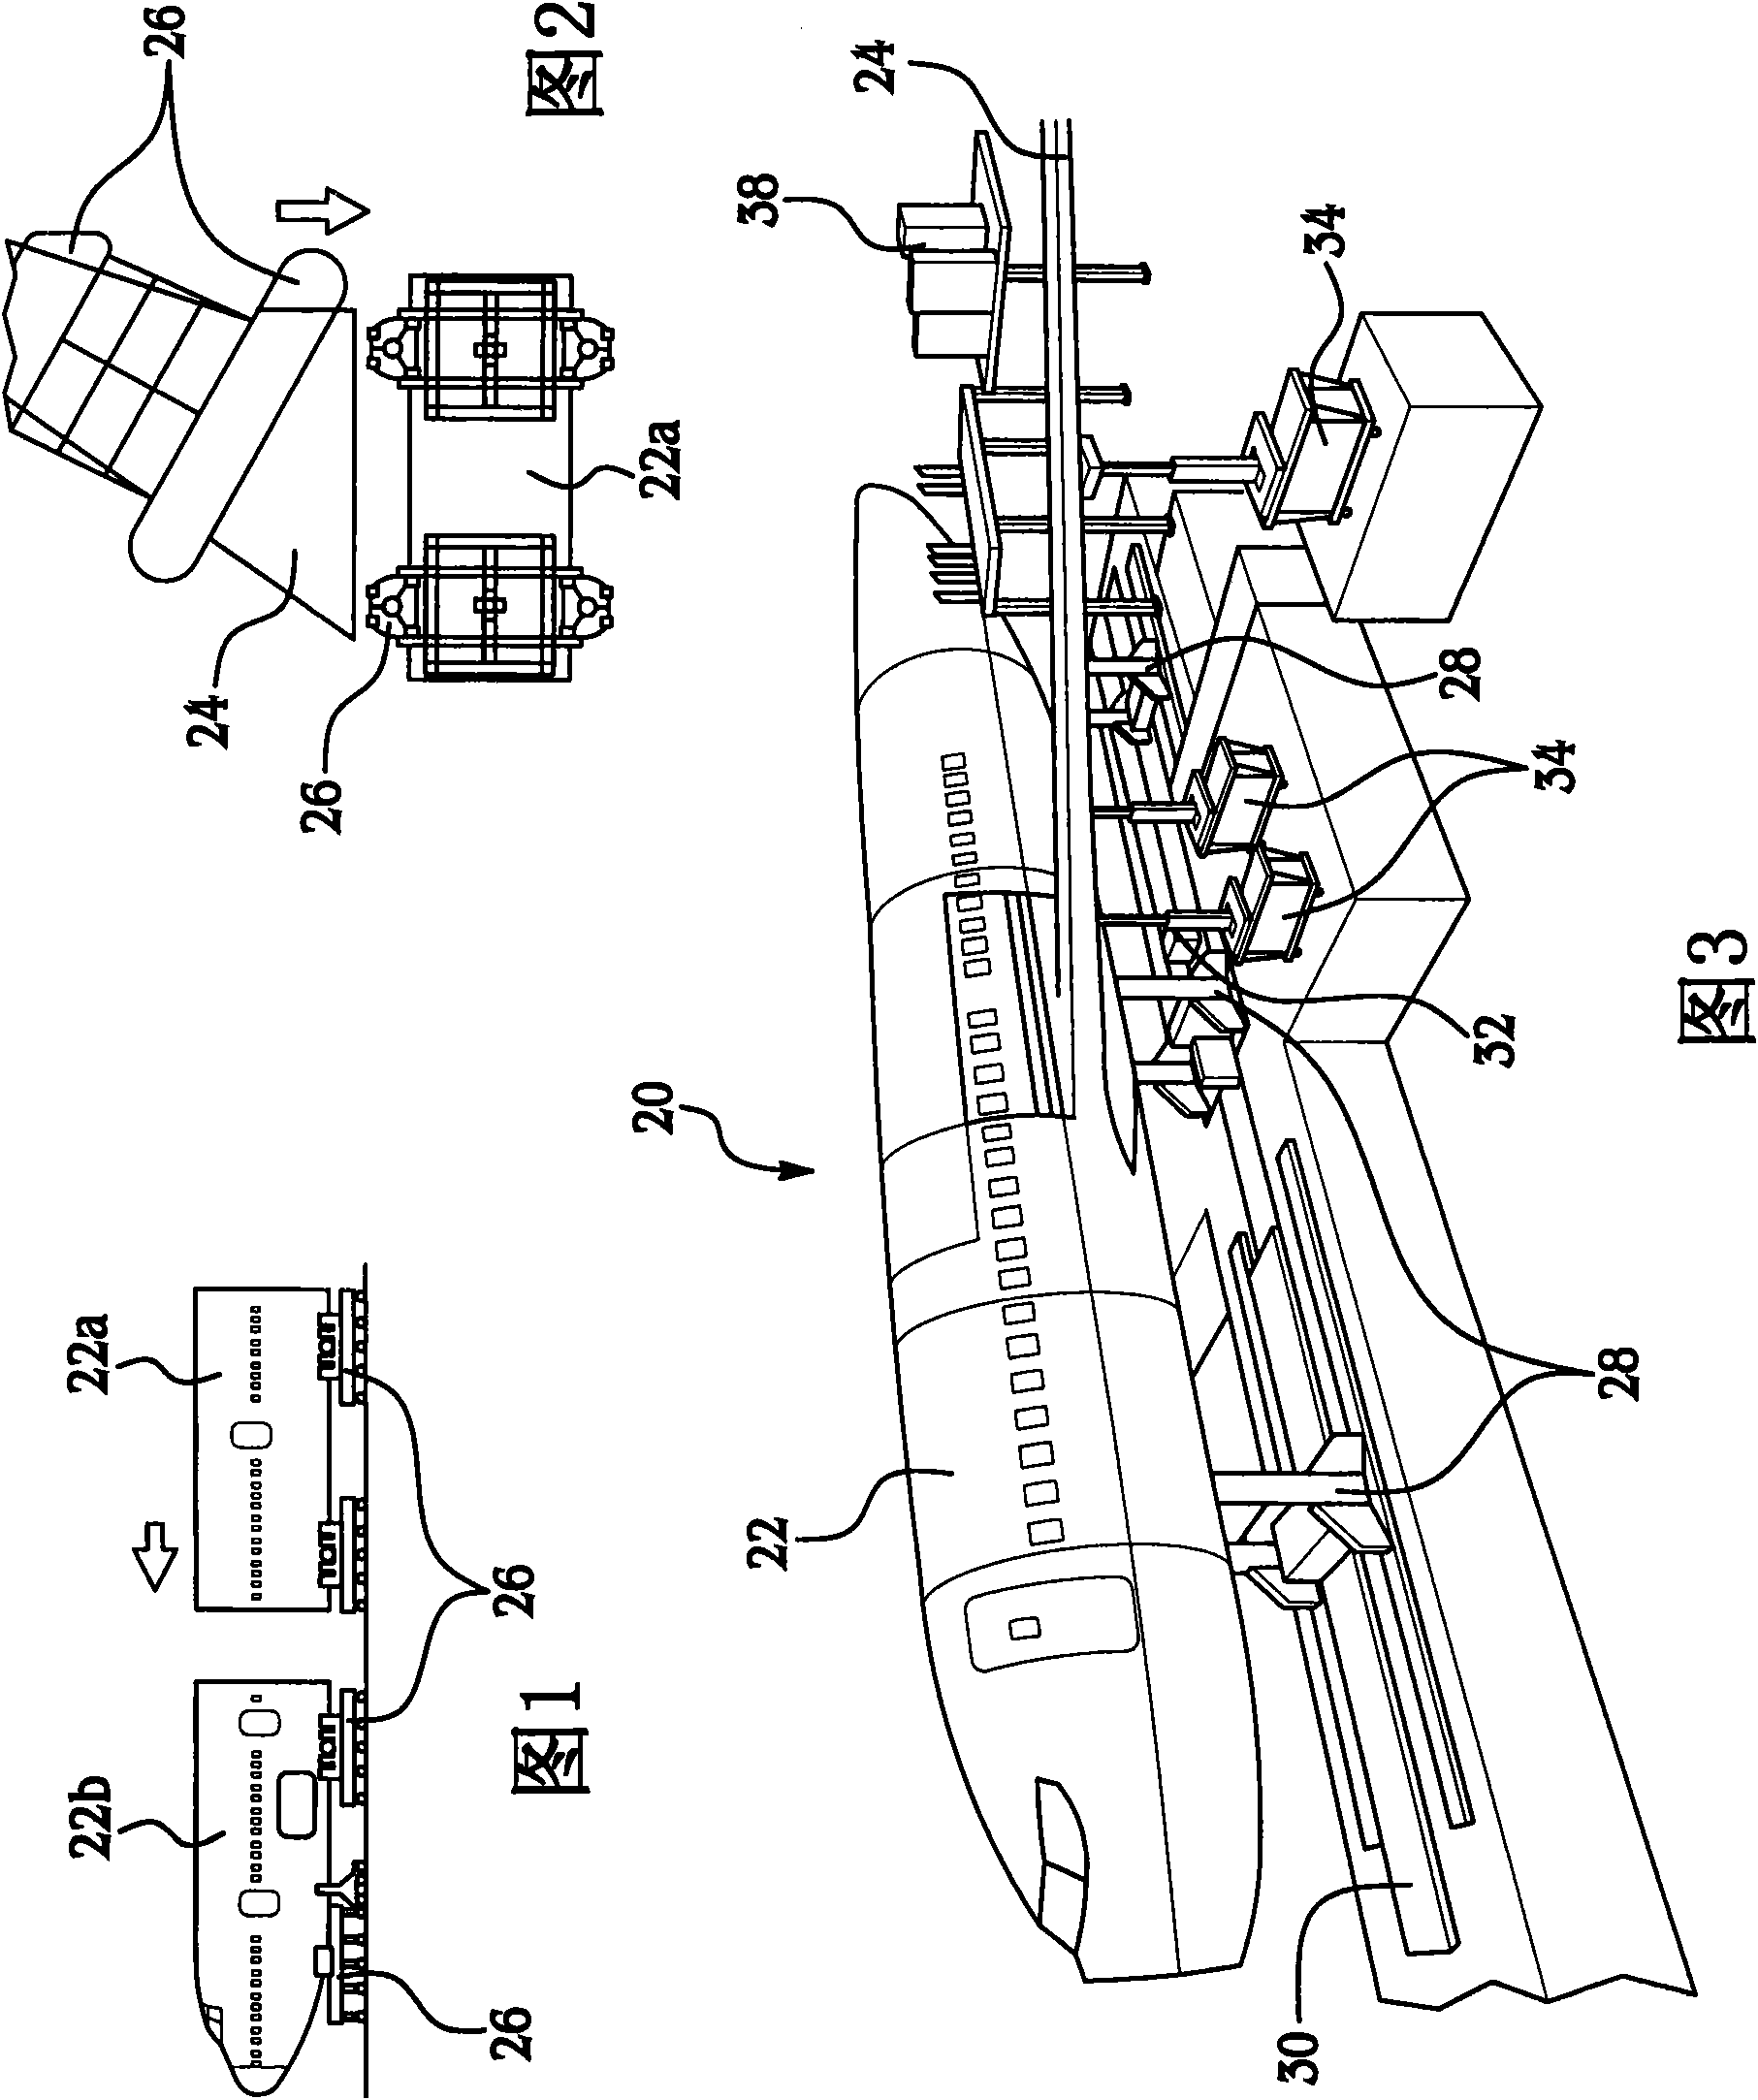 Method for fitting part assemblies